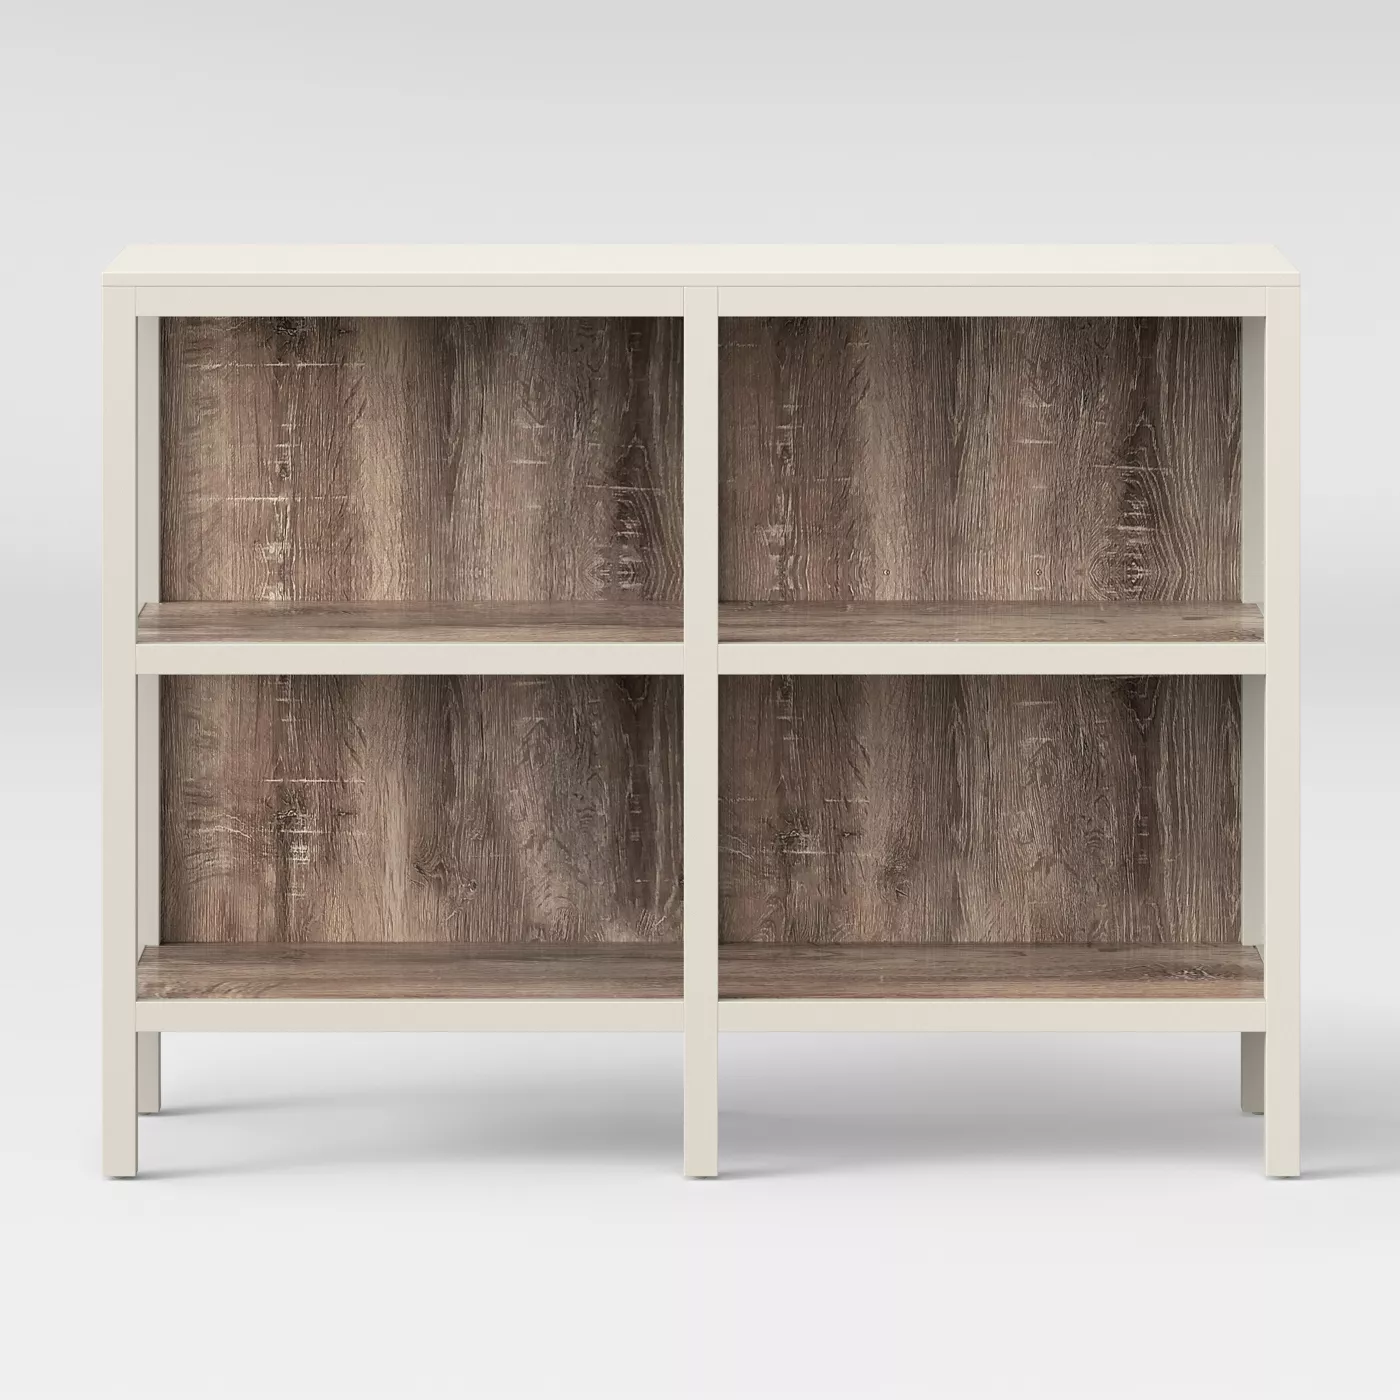 Bookshelf from Hearth and Hand collection